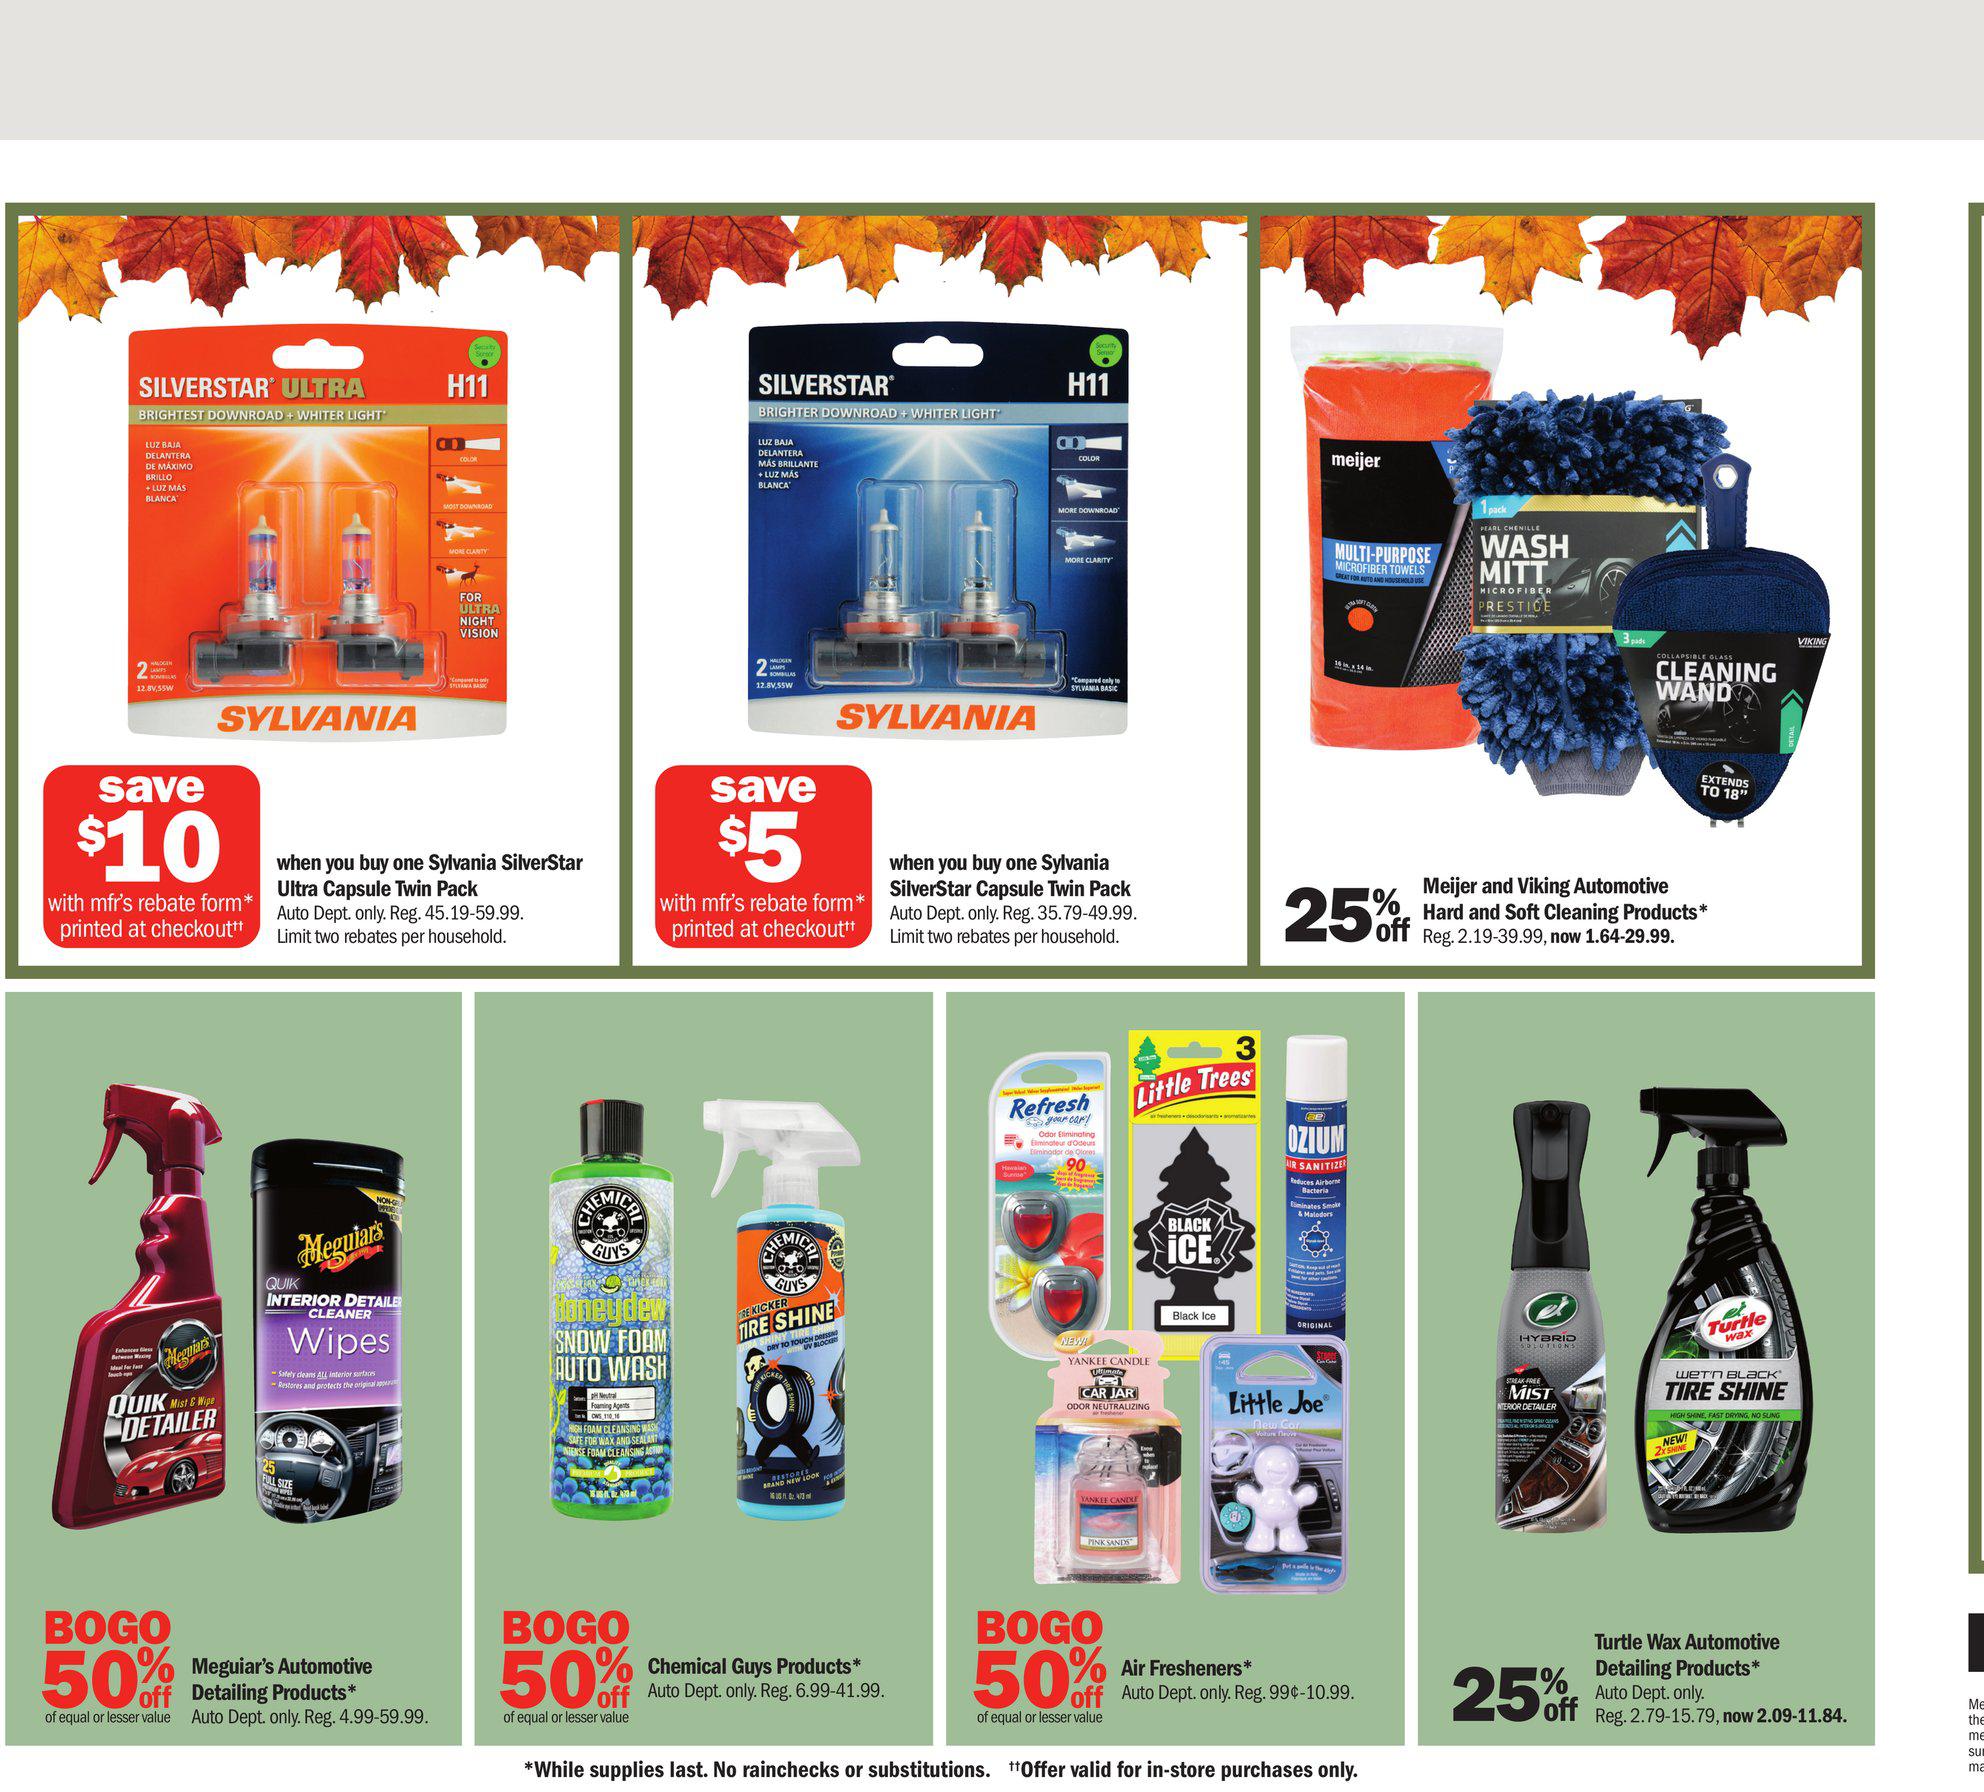 17.10.2021 Meijer ad 3. page